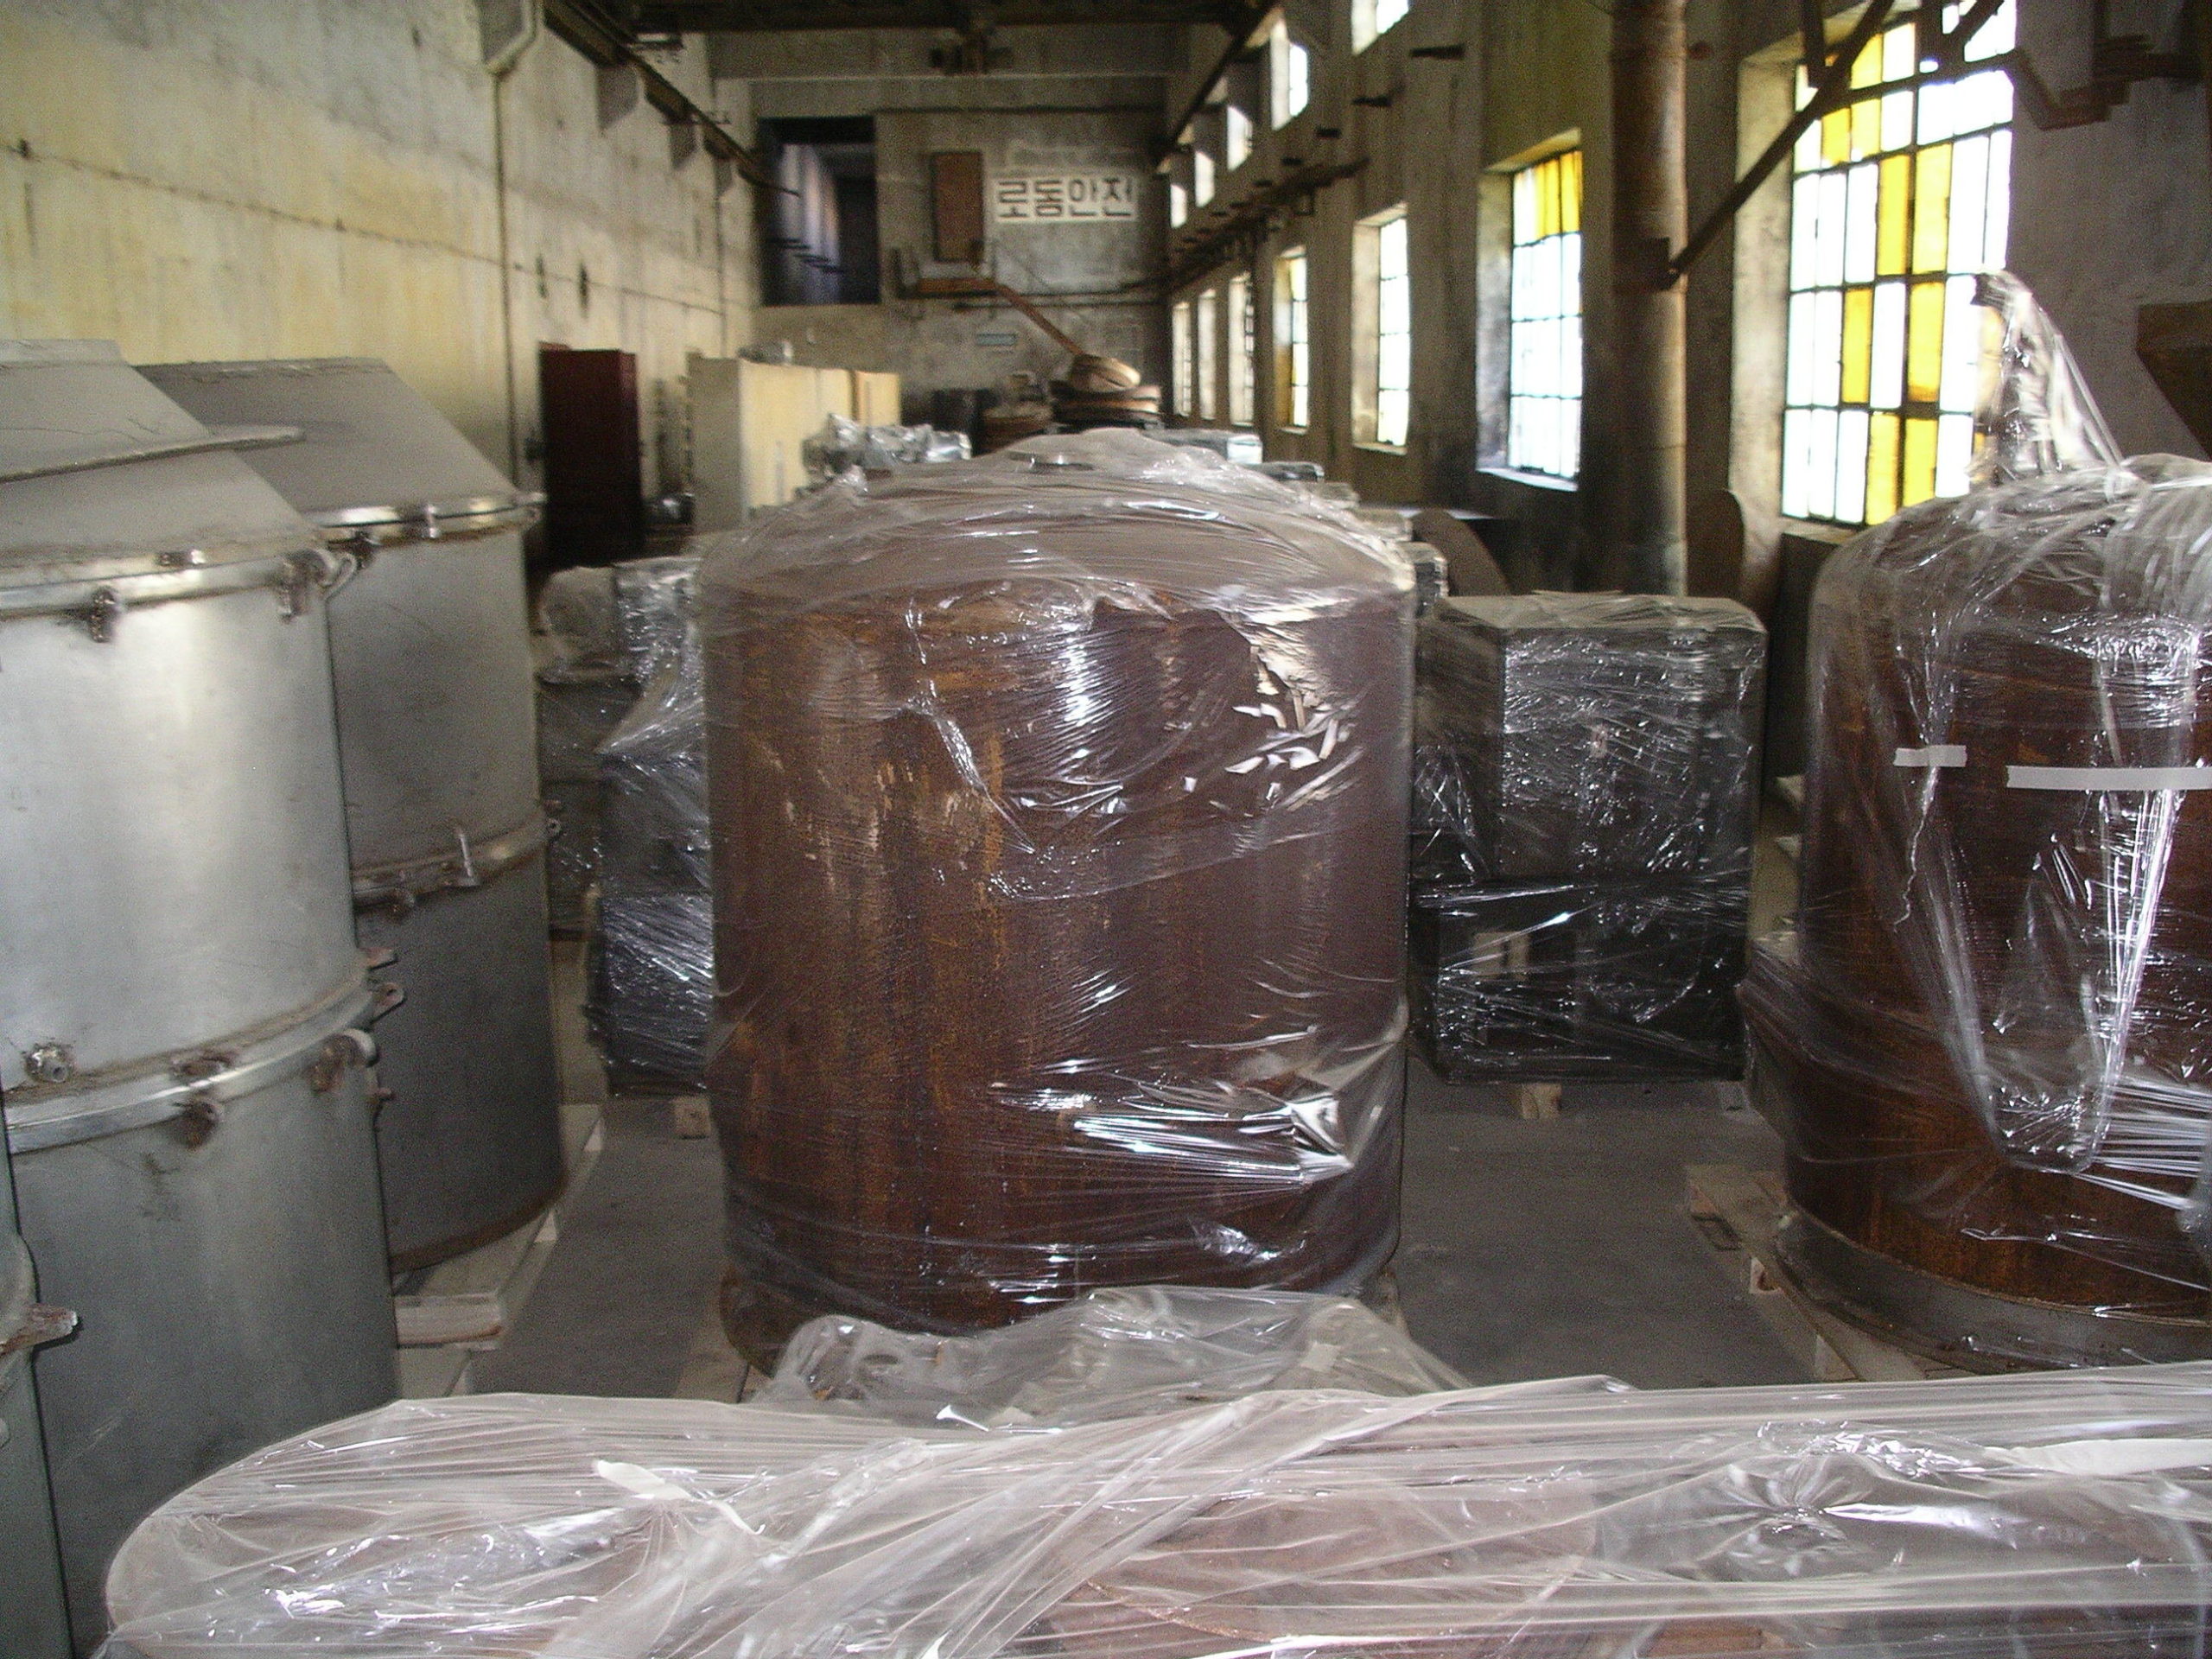 Metal tanks and other equipment pieces wrapped in plastic for storage